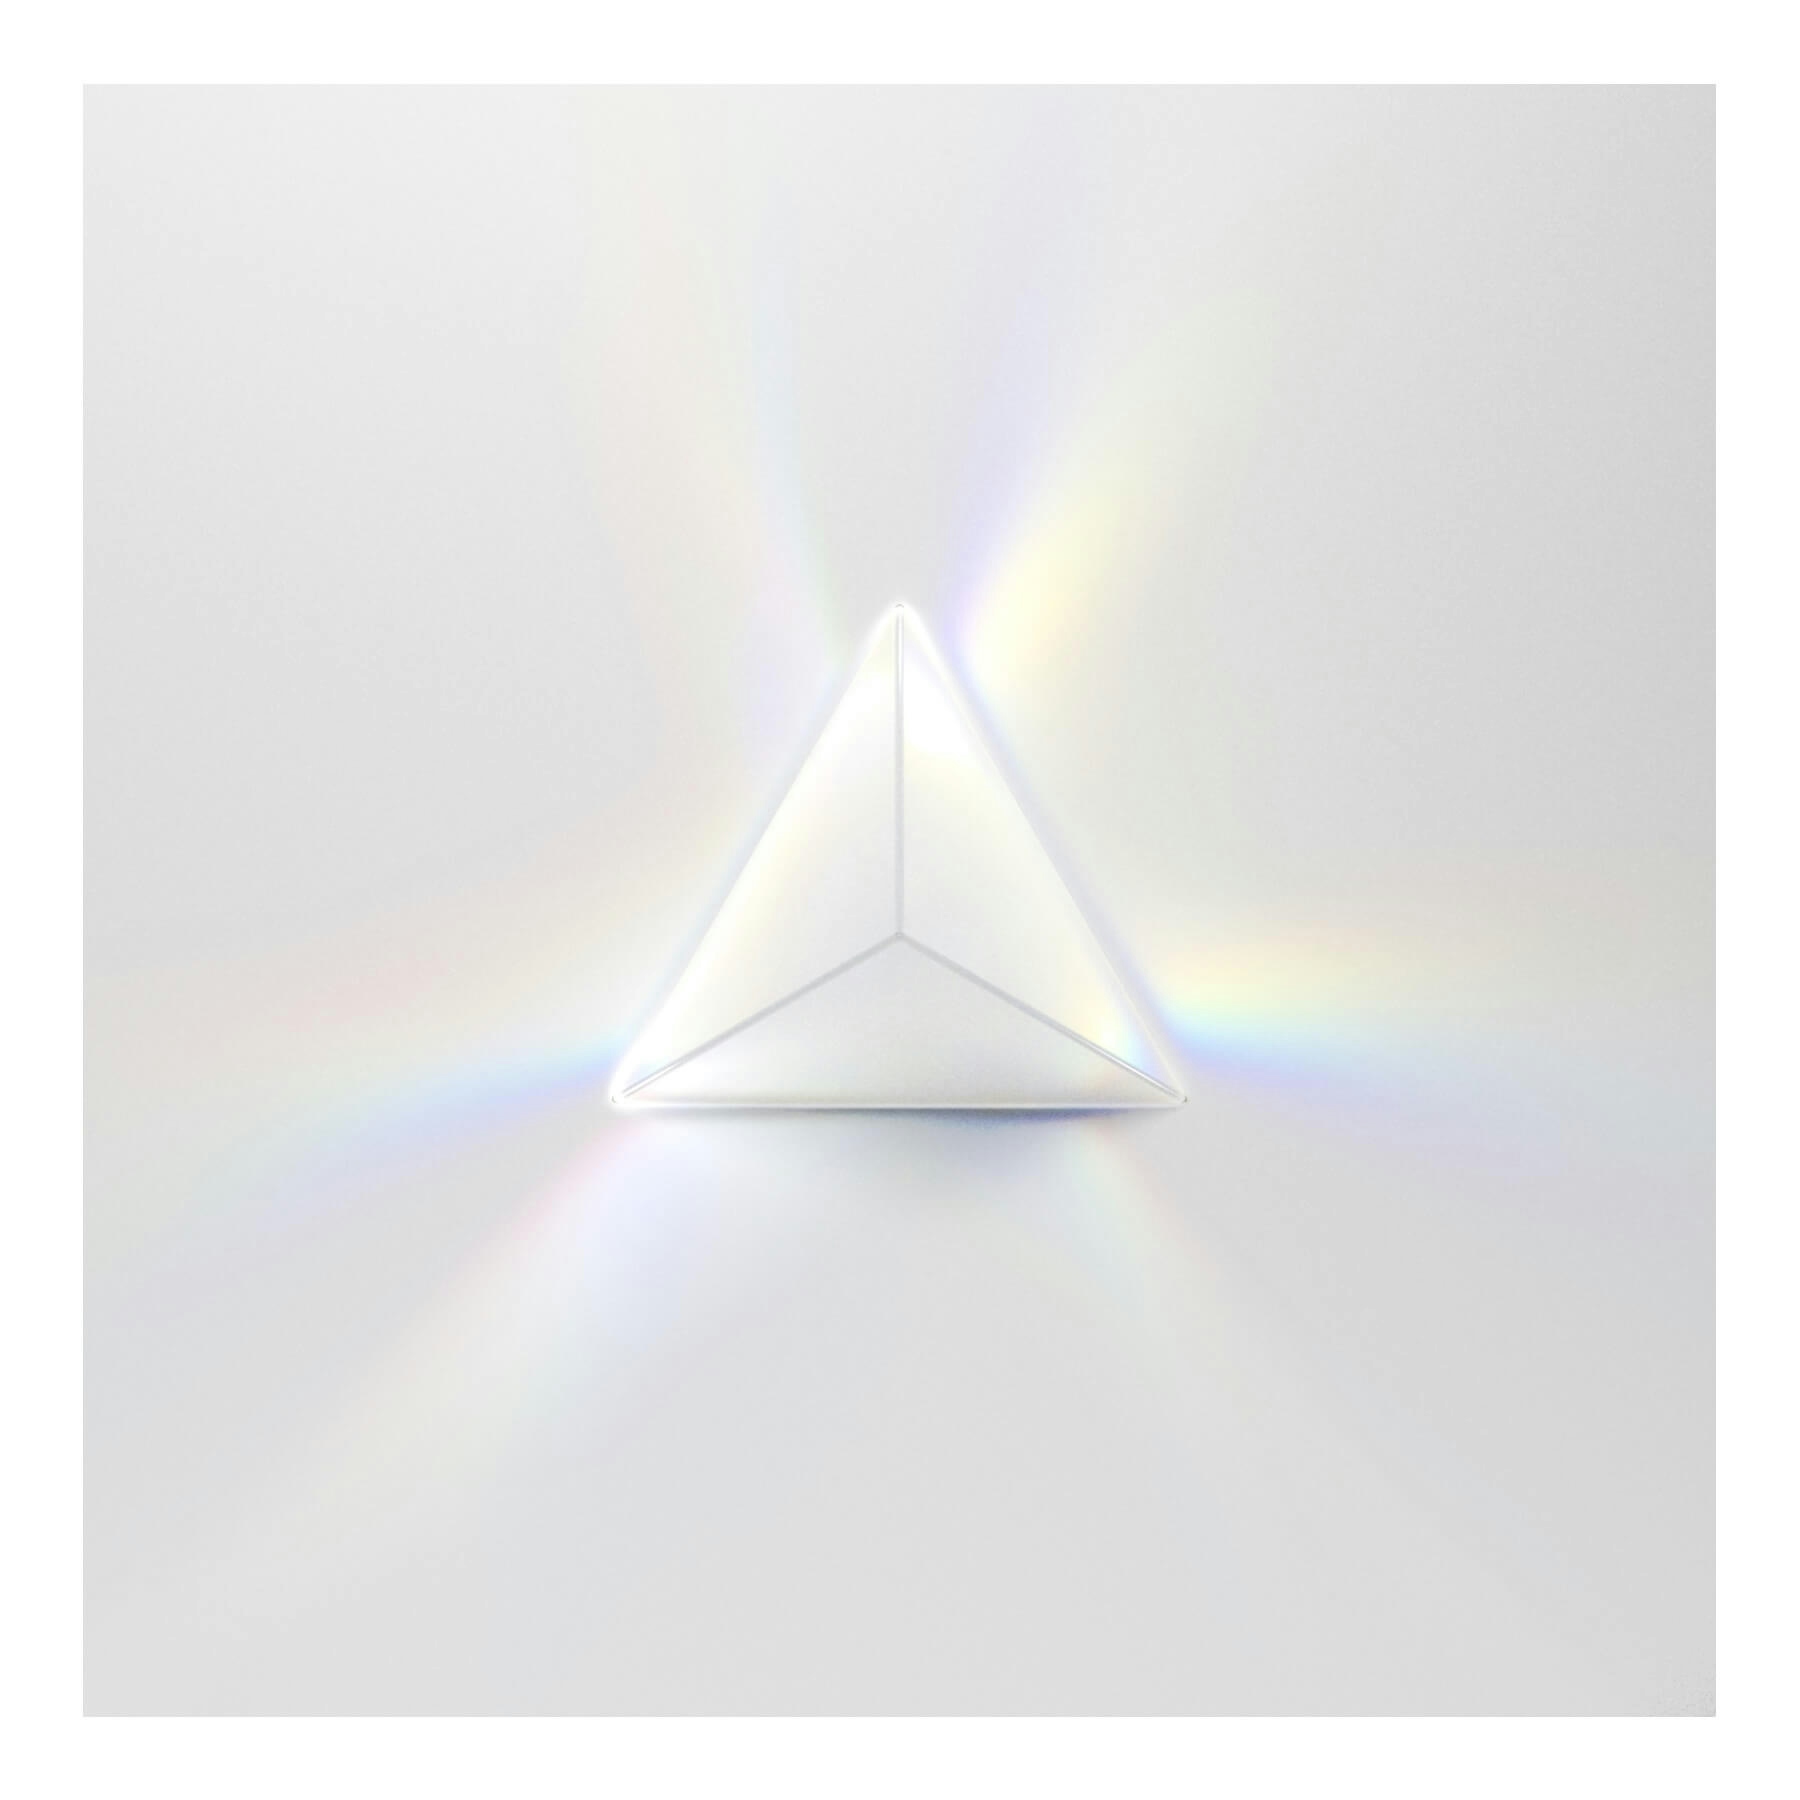 A black and white theme featuring an image of light rays exiting a prism in 3 directions. The light rays are not vertical but leave the prism at various angles, creating a dynamic composition.